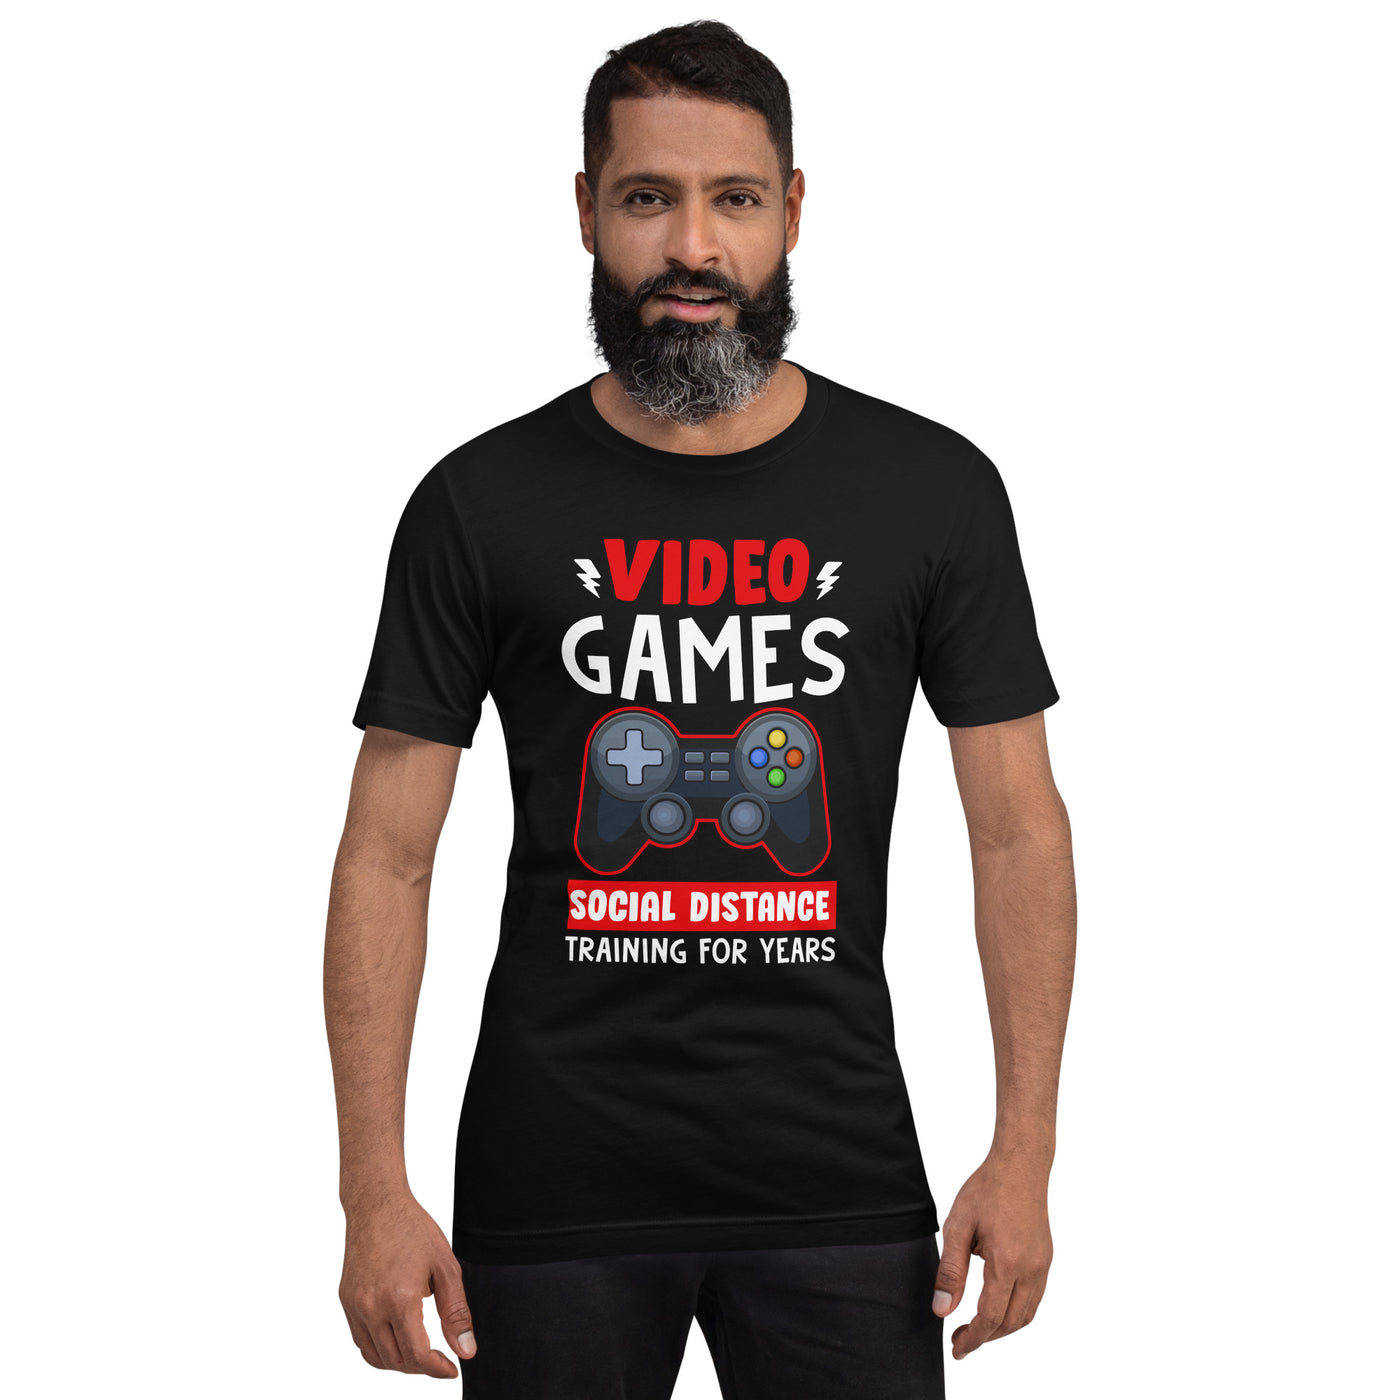 Video Games Social Distance Training for Years - Unisex t-shirt